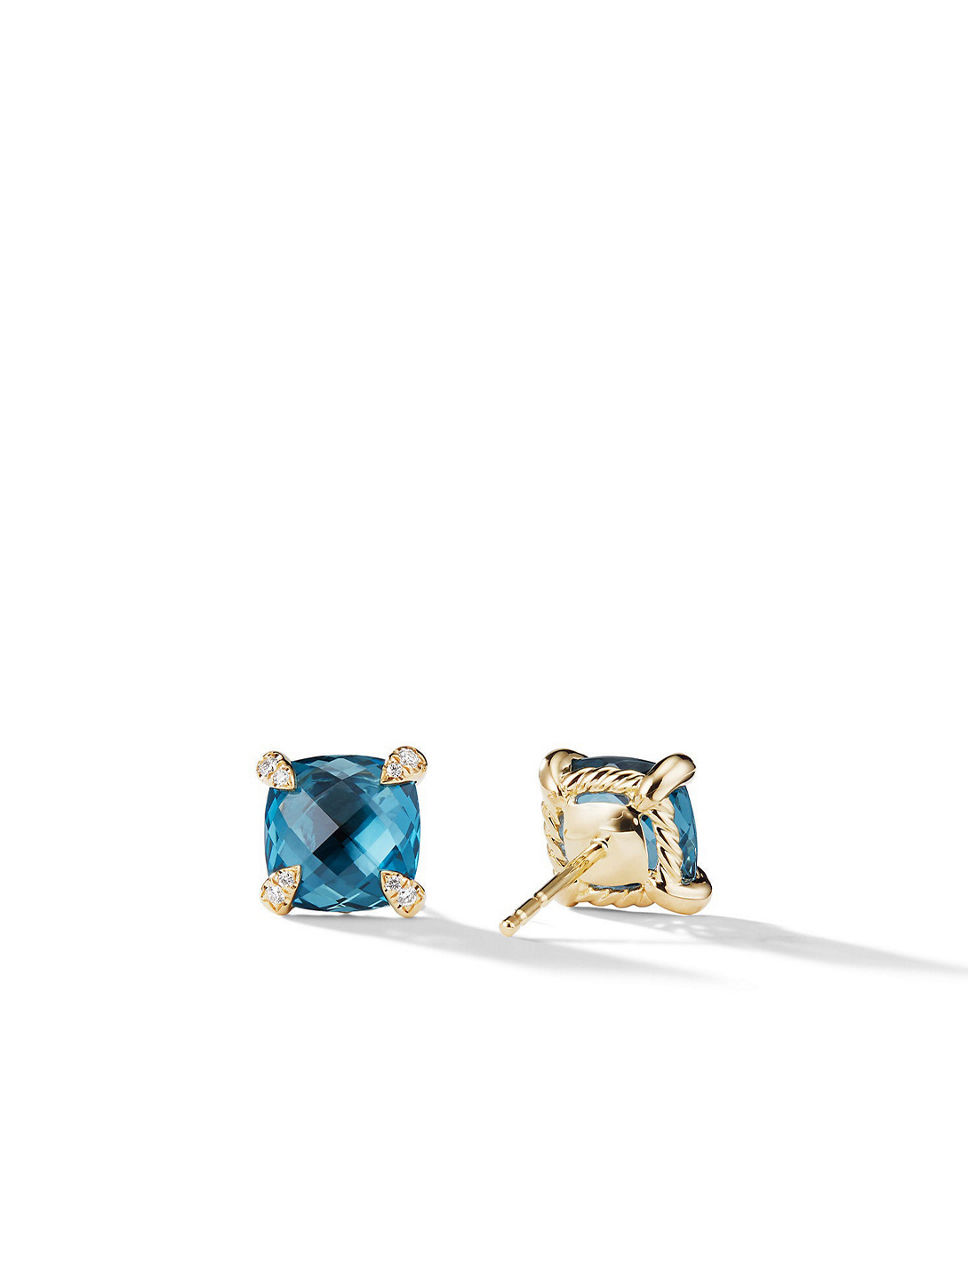 Chatelaine® Stud Earrings In 18k Yellow Gold With Hampton Blue Topaz And Diamonds, 8mm